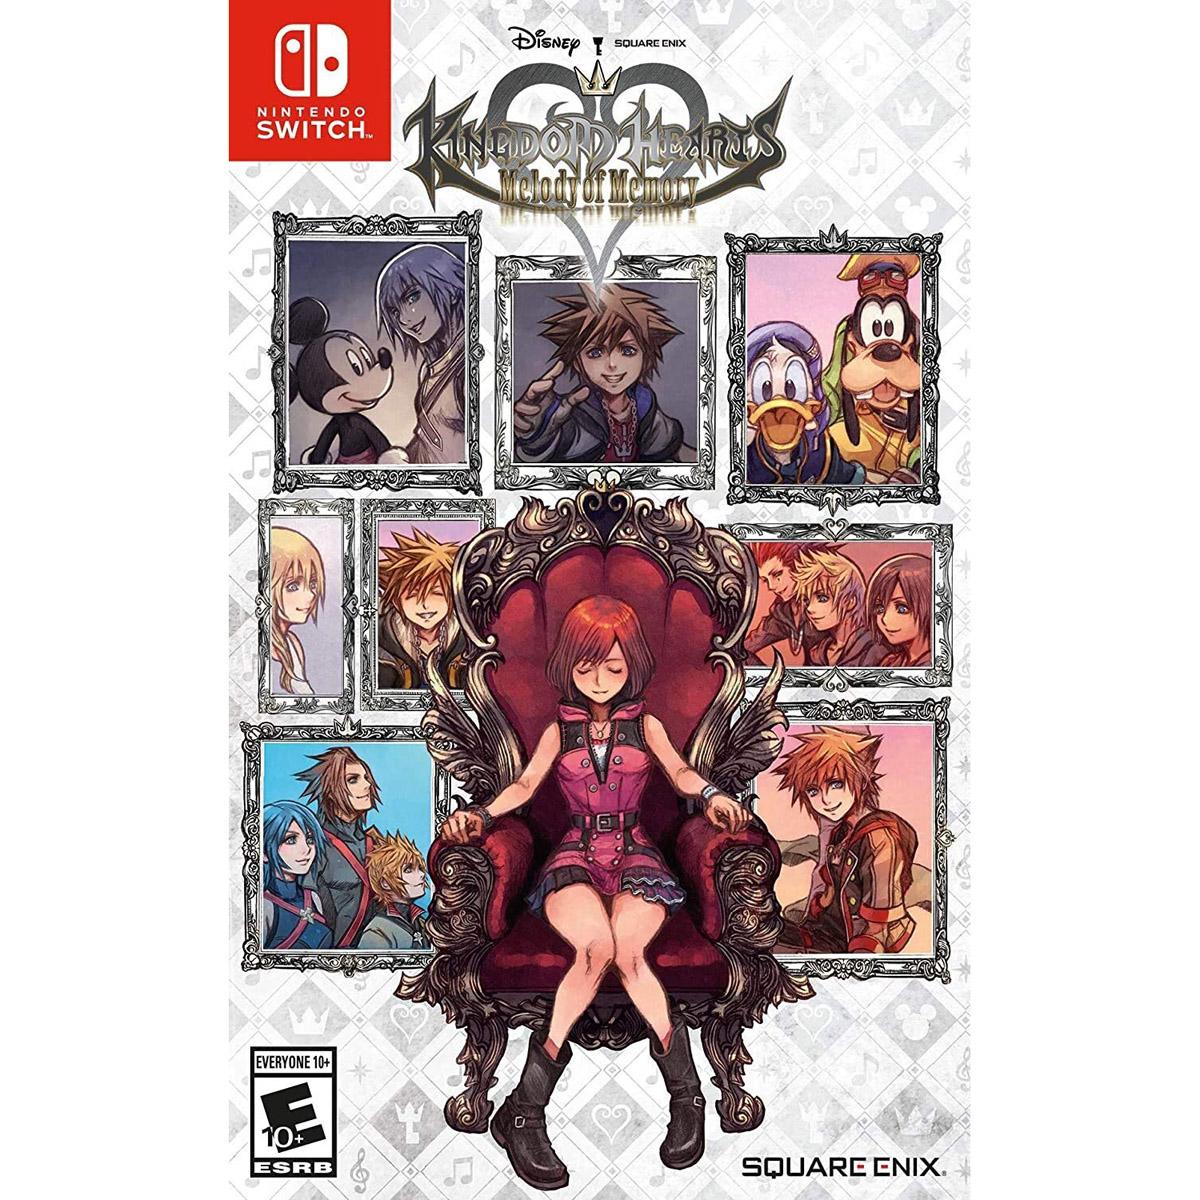 Kingdom Hearts Melody of Memory Nintendo Switch for $19.99